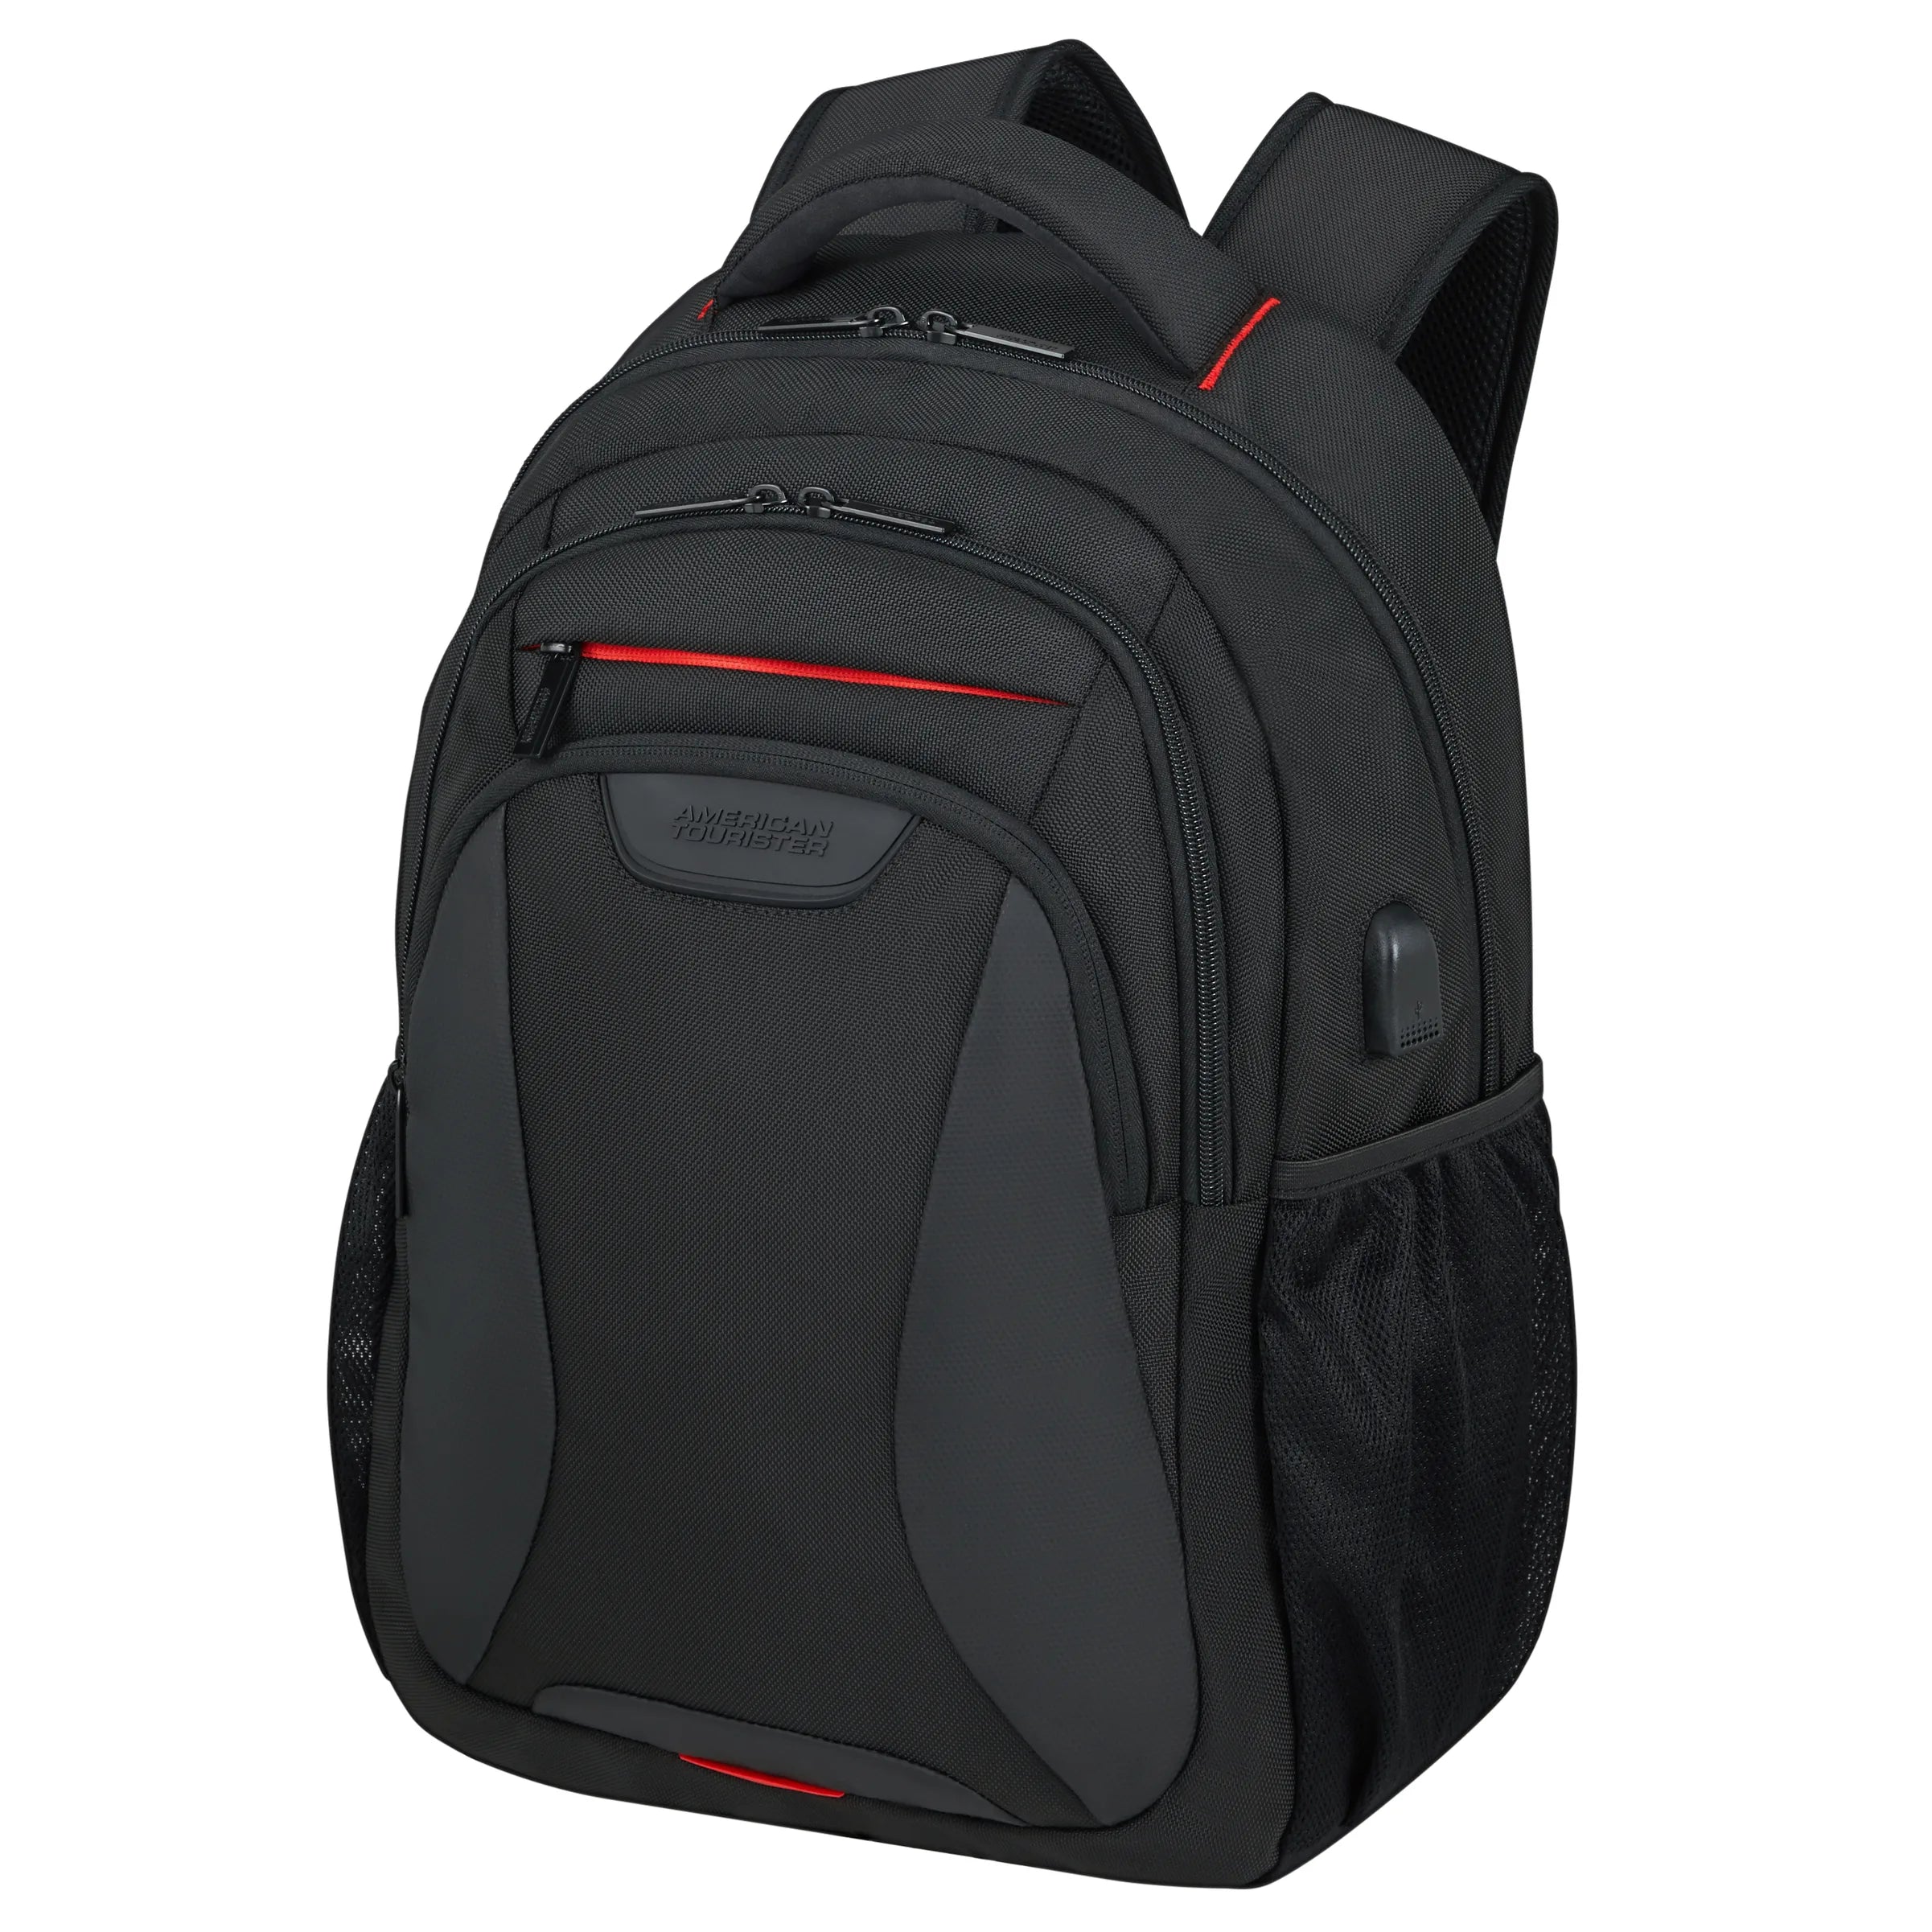 American Tourister At Work Laptop Backpack Eco USB 52 cm - Bass Black